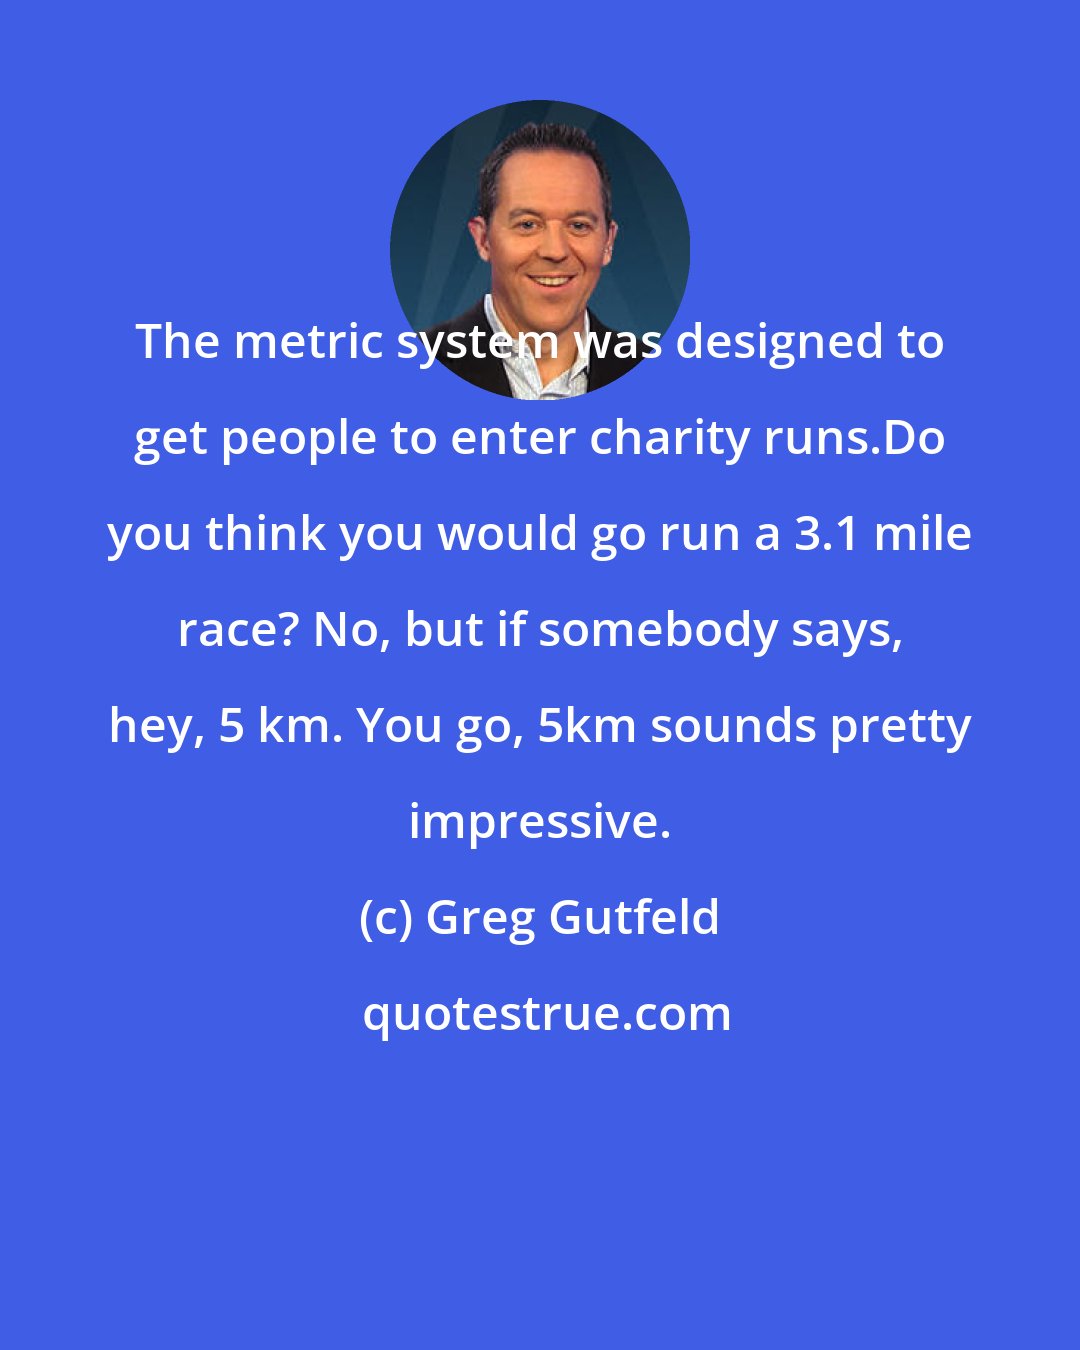 Greg Gutfeld: The metric system was designed to get people to enter charity runs.Do you think you would go run a 3.1 mile race? No, but if somebody says, hey, 5 km. You go, 5km sounds pretty impressive.